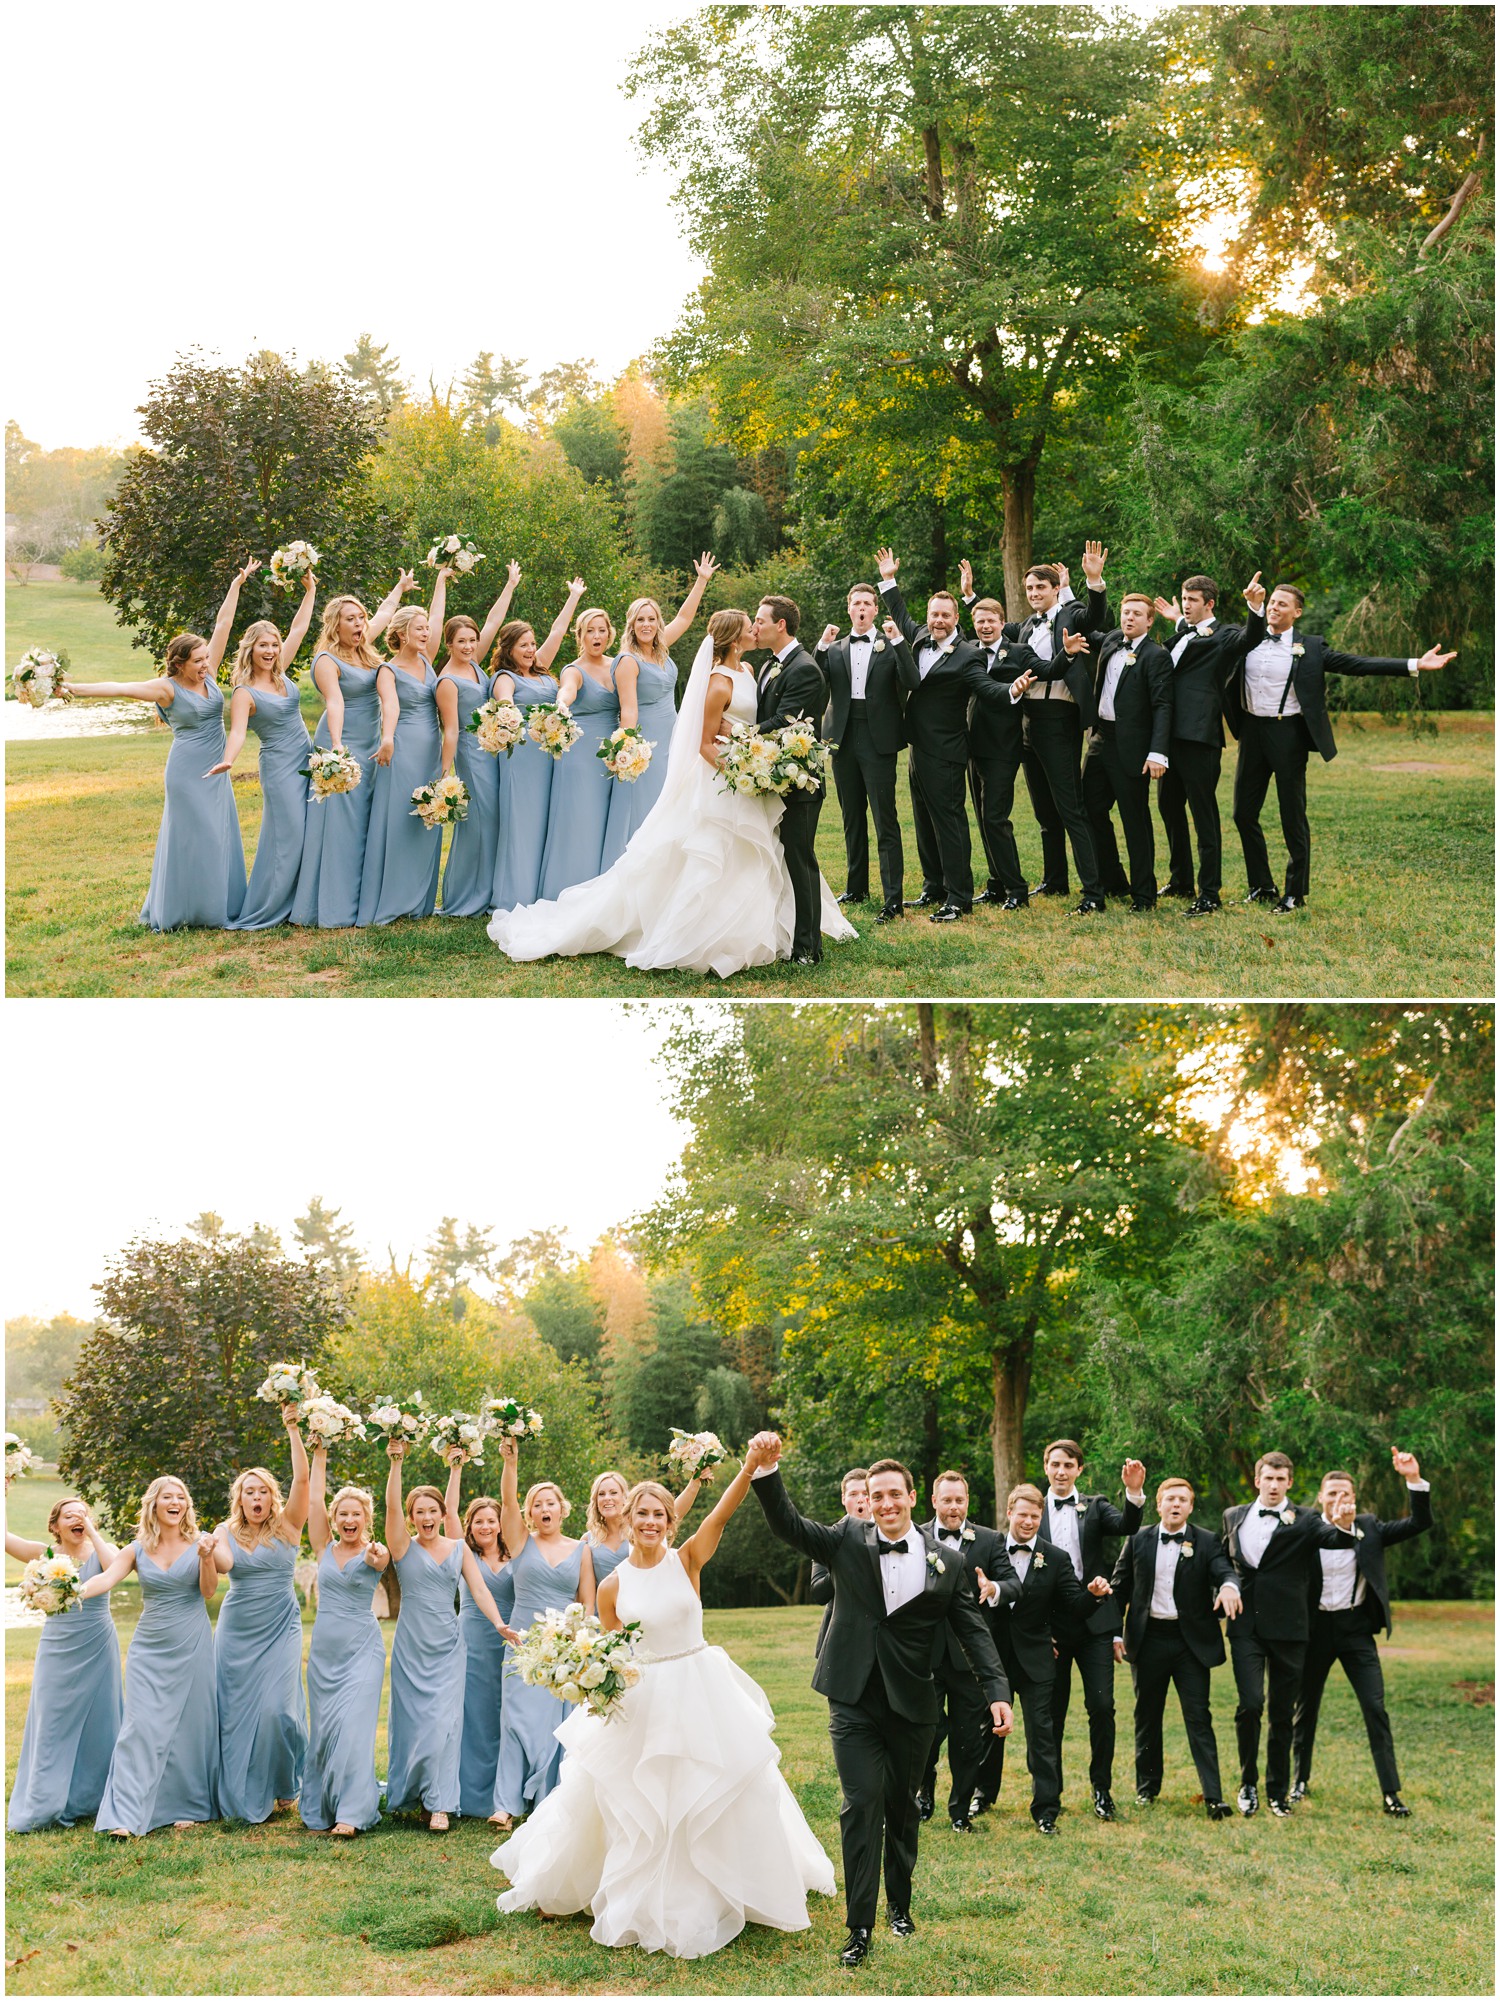 bridal party portraits with bridesmaids cheering with bouquets in the air and groomsmen in tuxes for Winston-Salem wedding